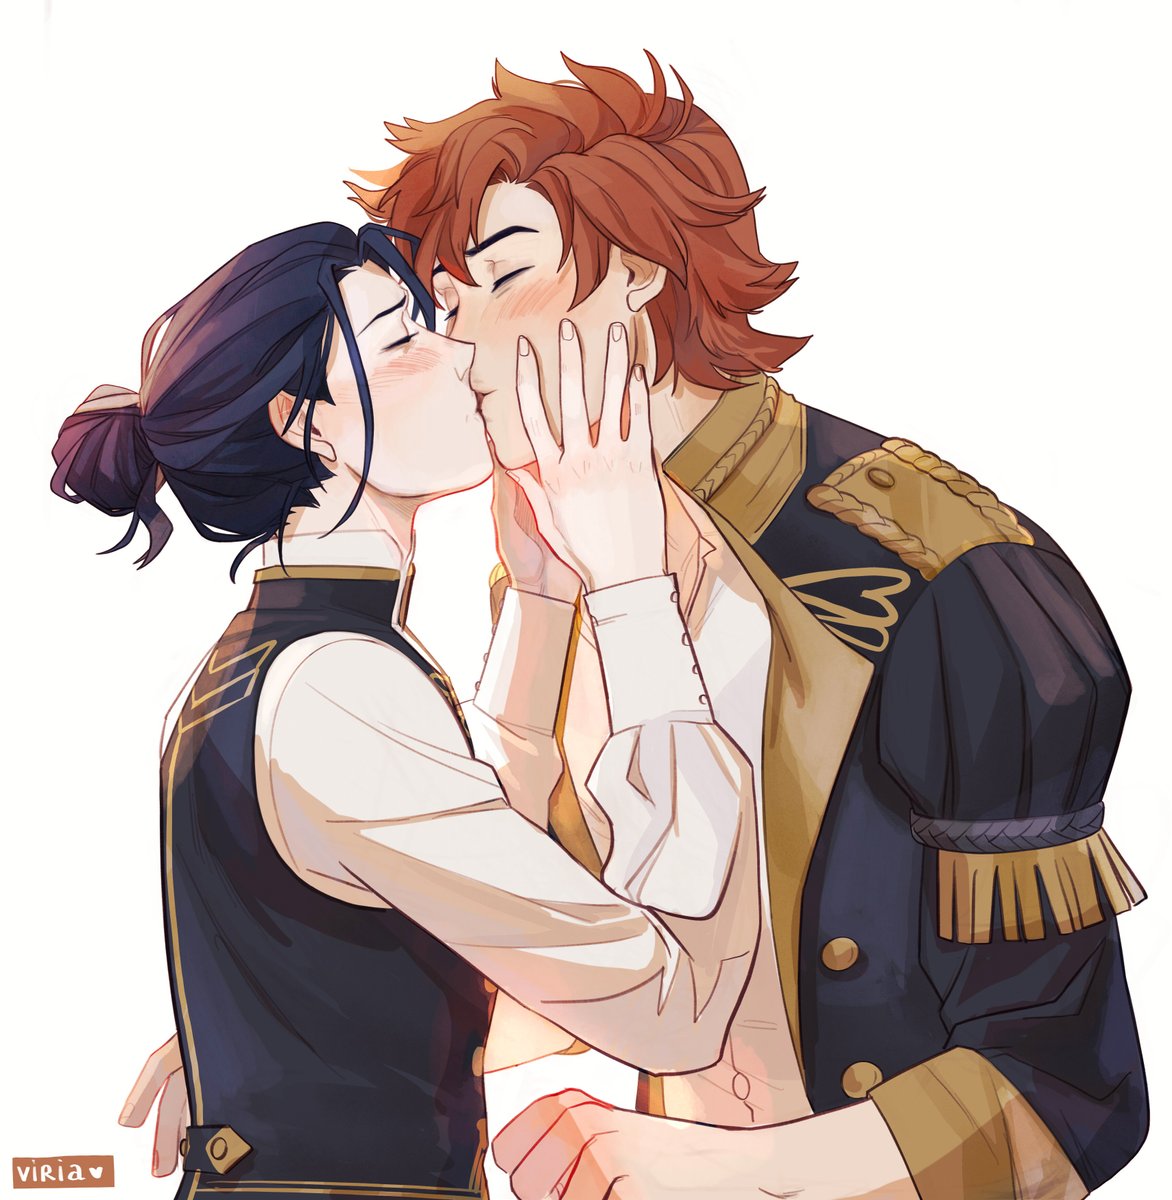 So I hold you by the jaw
And kiss you to be sure
With so much more than before

#sylvix #sylvainjosegautier #FelixHugoFraldarius #FireEmblemThreeHouses #fe3h #art